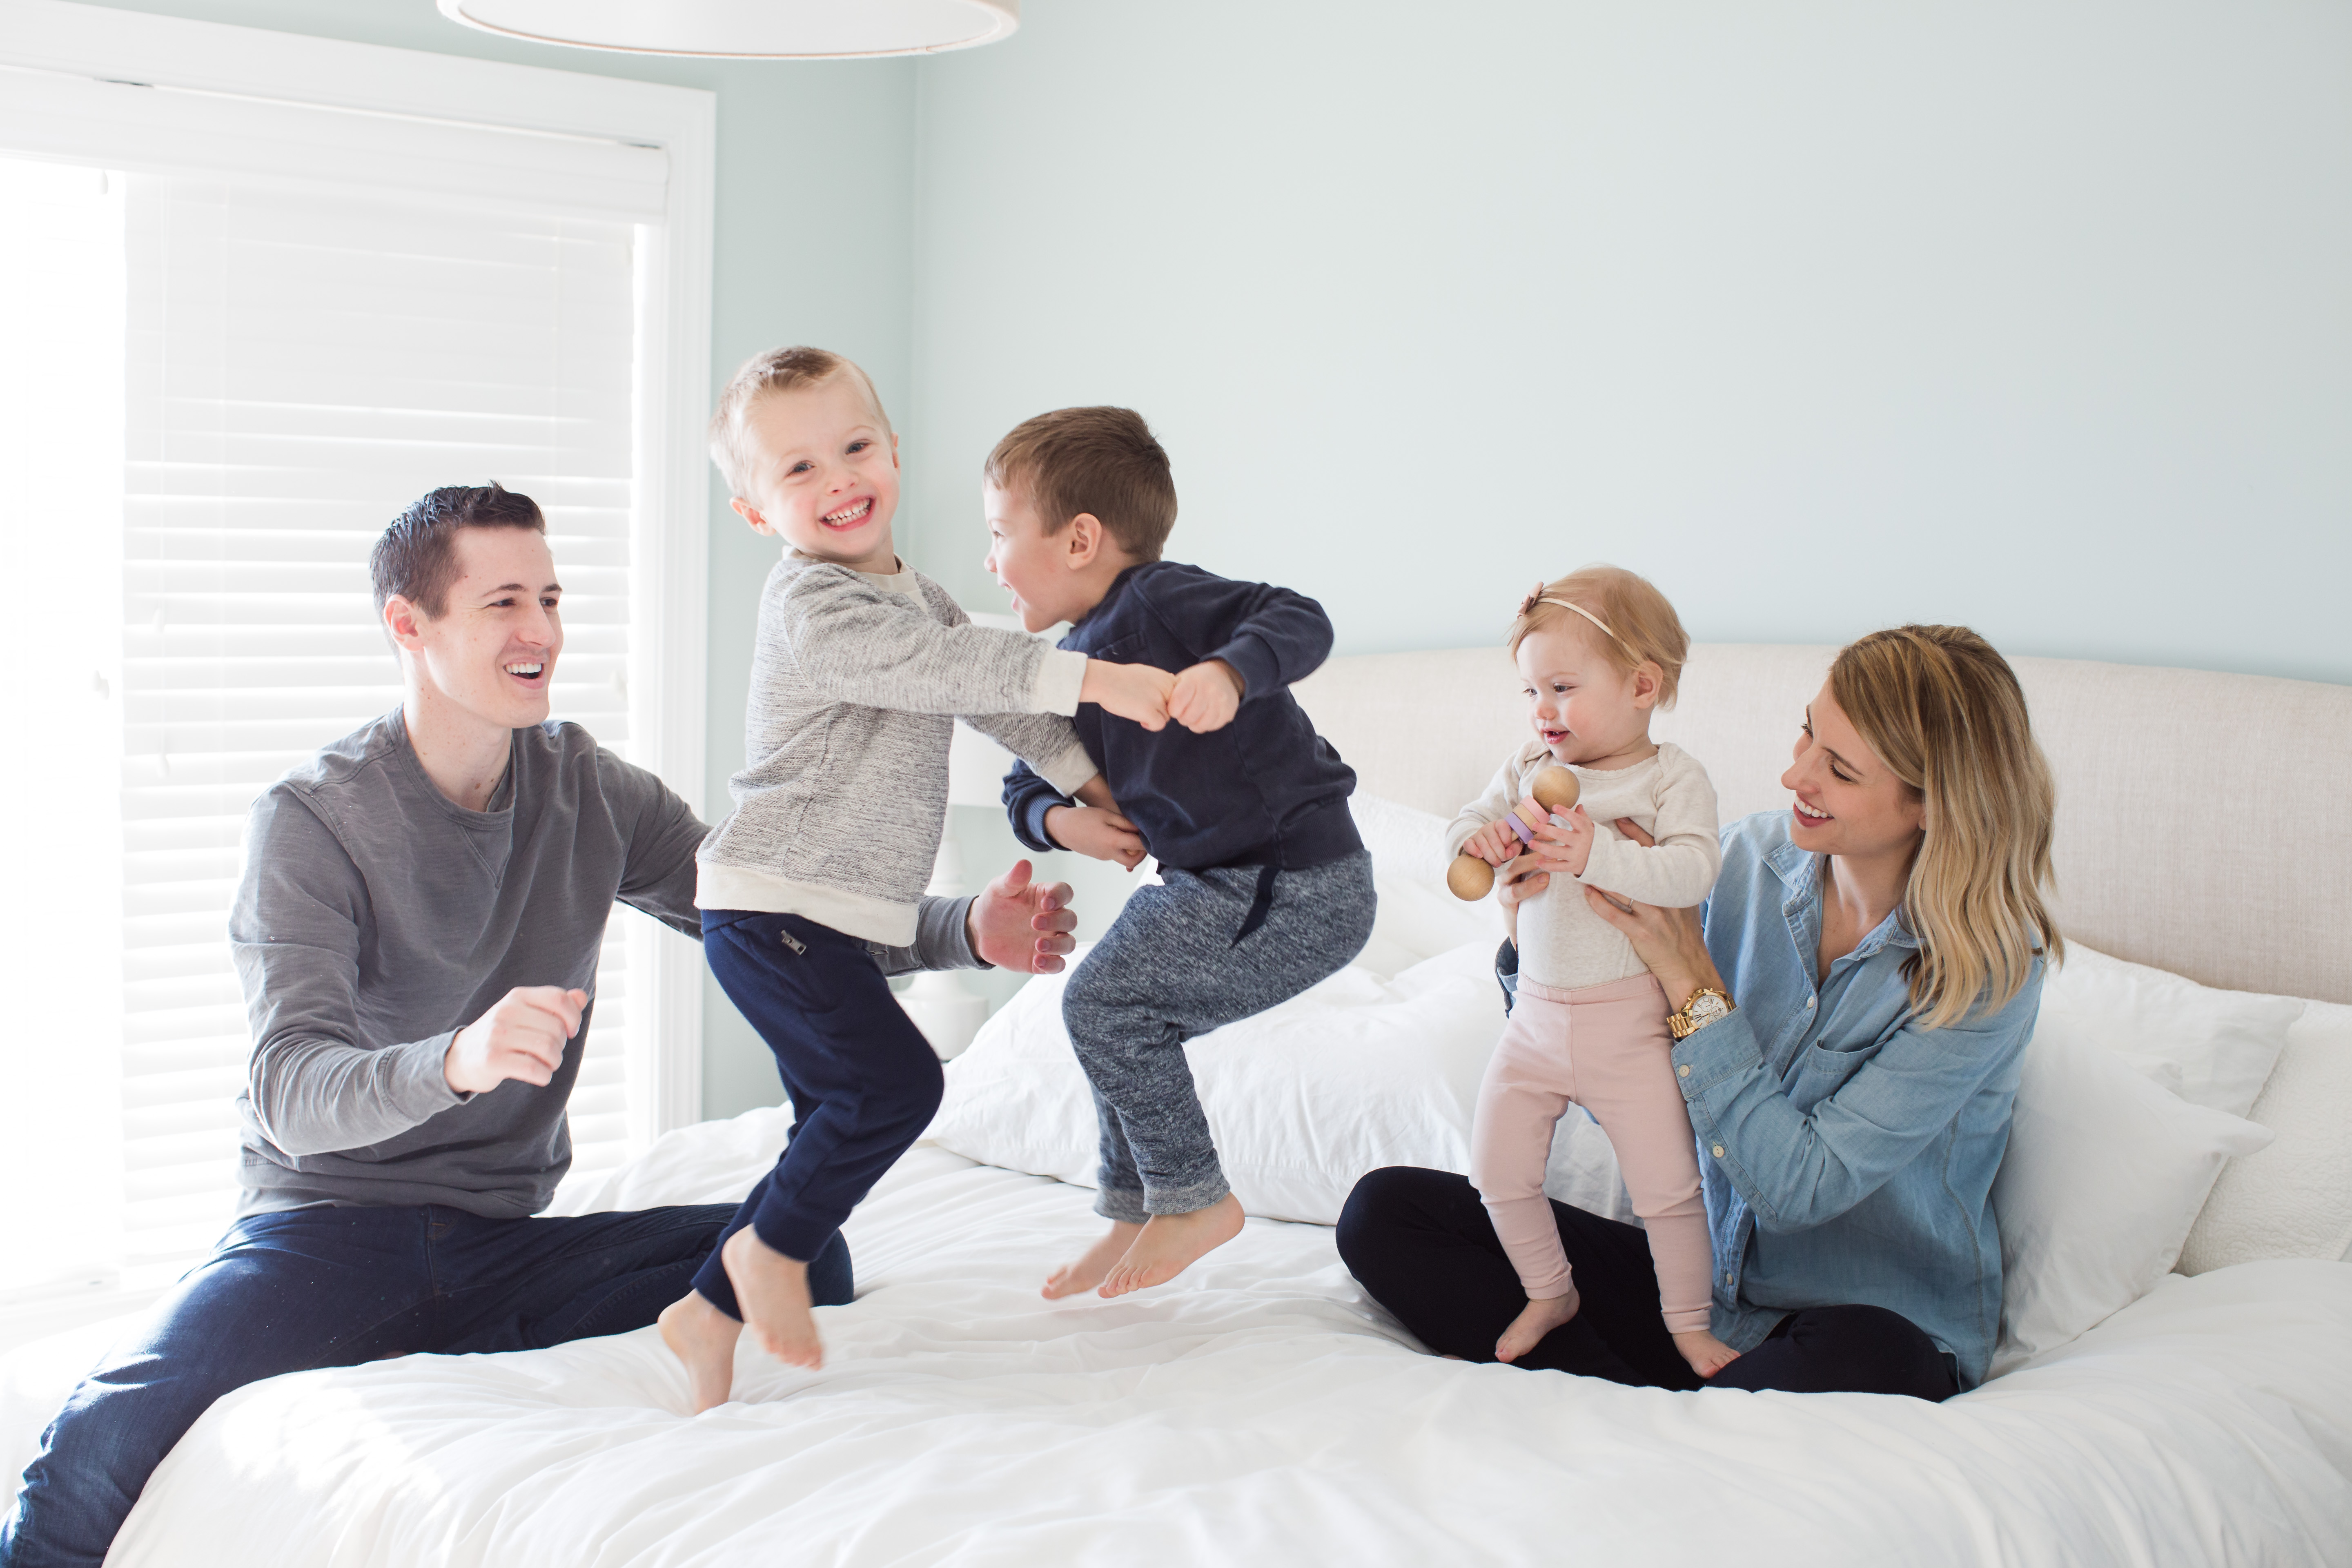 Kids jumping on bed with parents